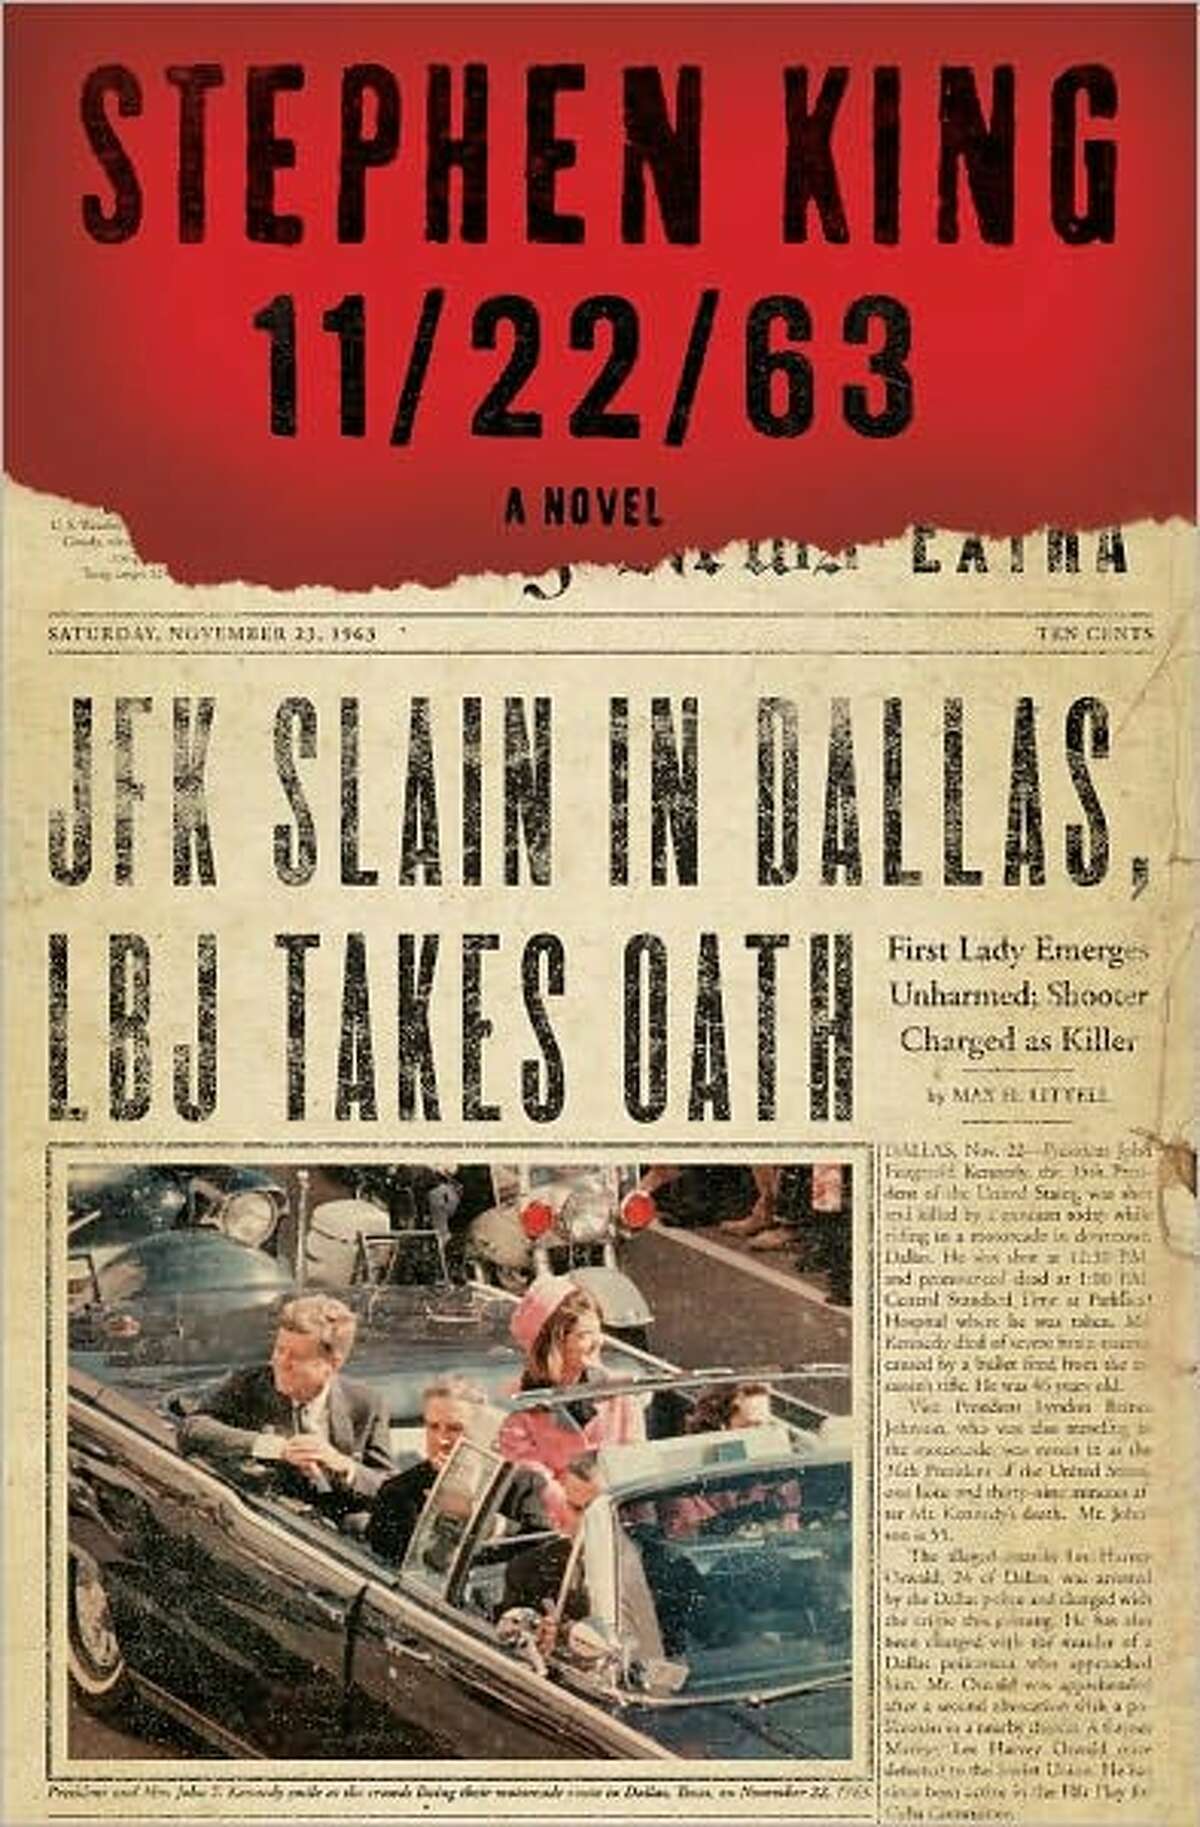 Cover for 11/22/63, by Stephen King